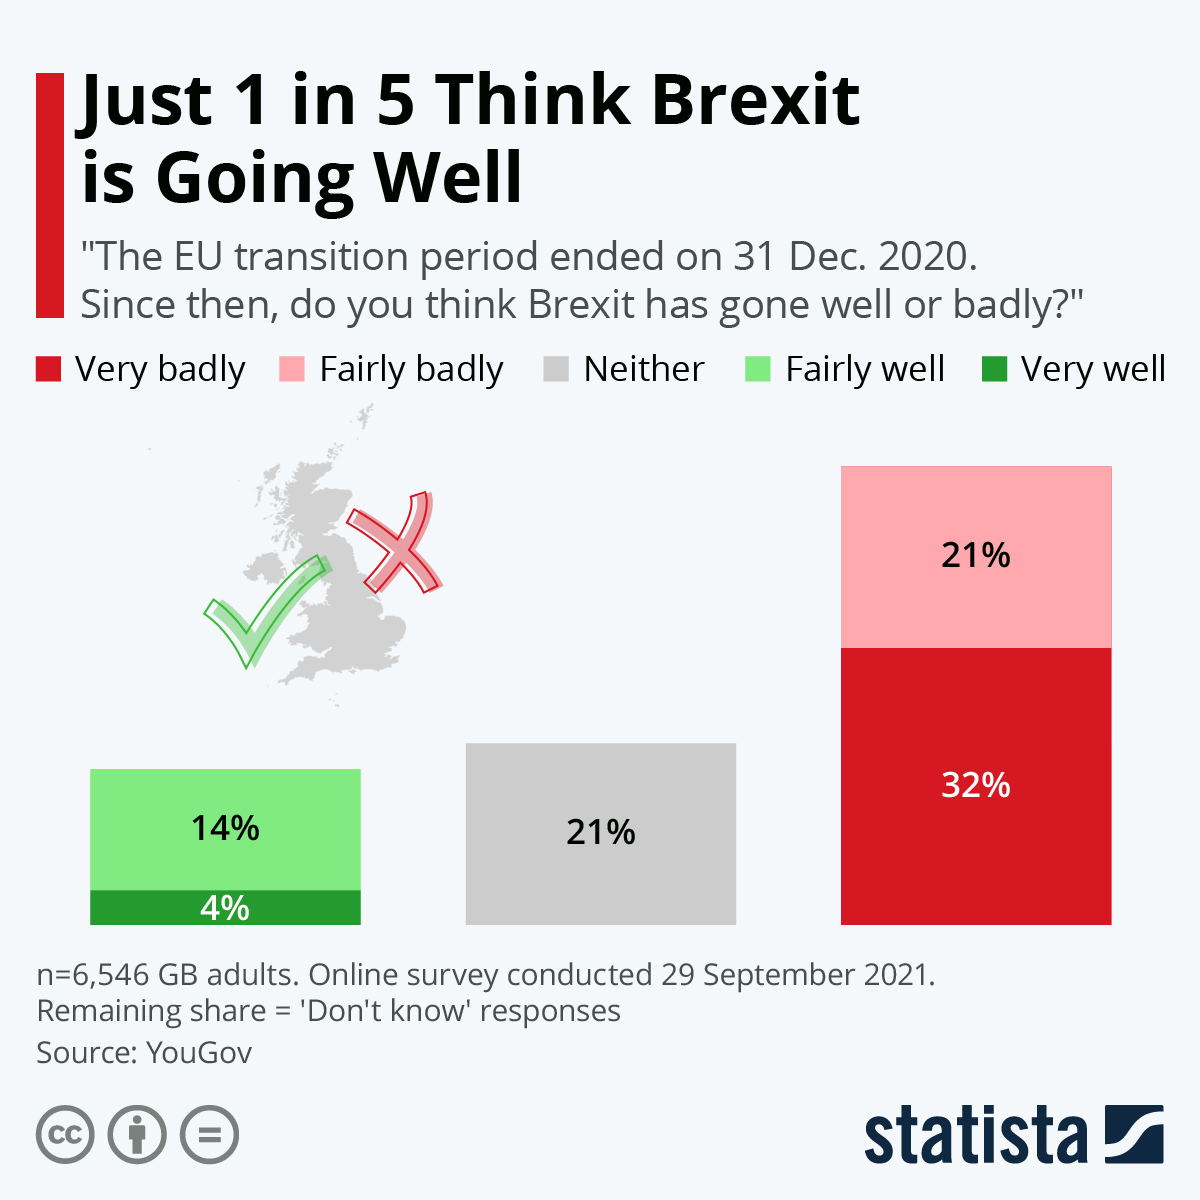 Just 1 in 5 Think Brexit is Going Well